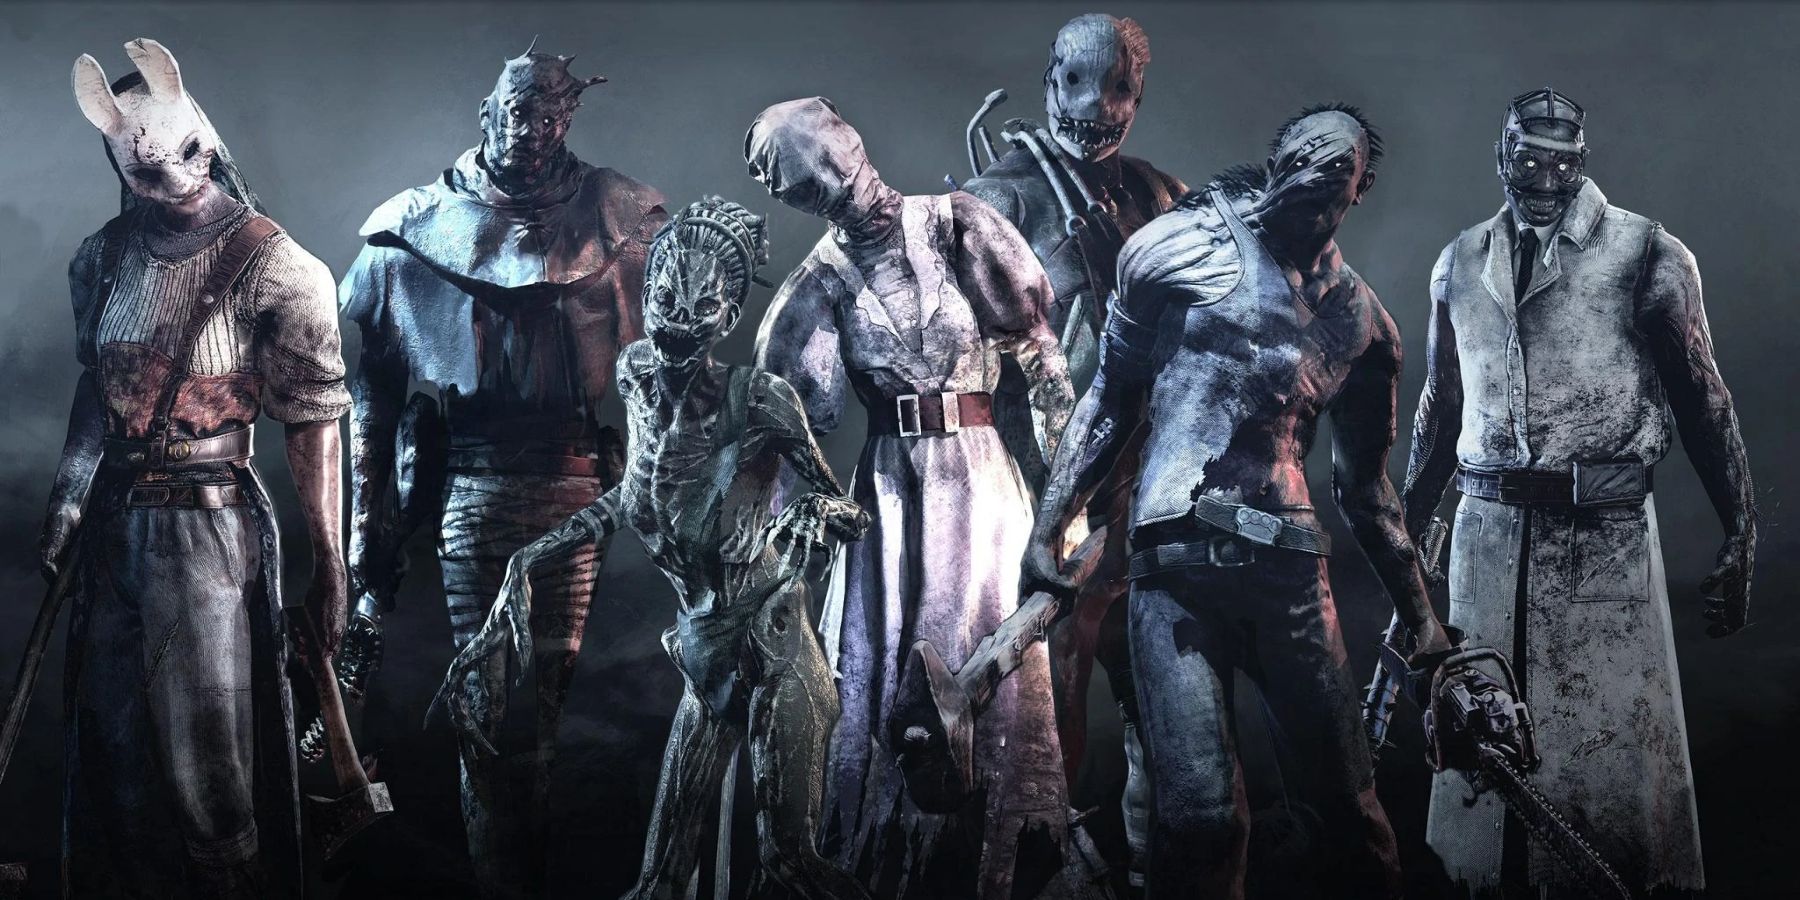 Image from Dead by Daylight showing a series of Killers.